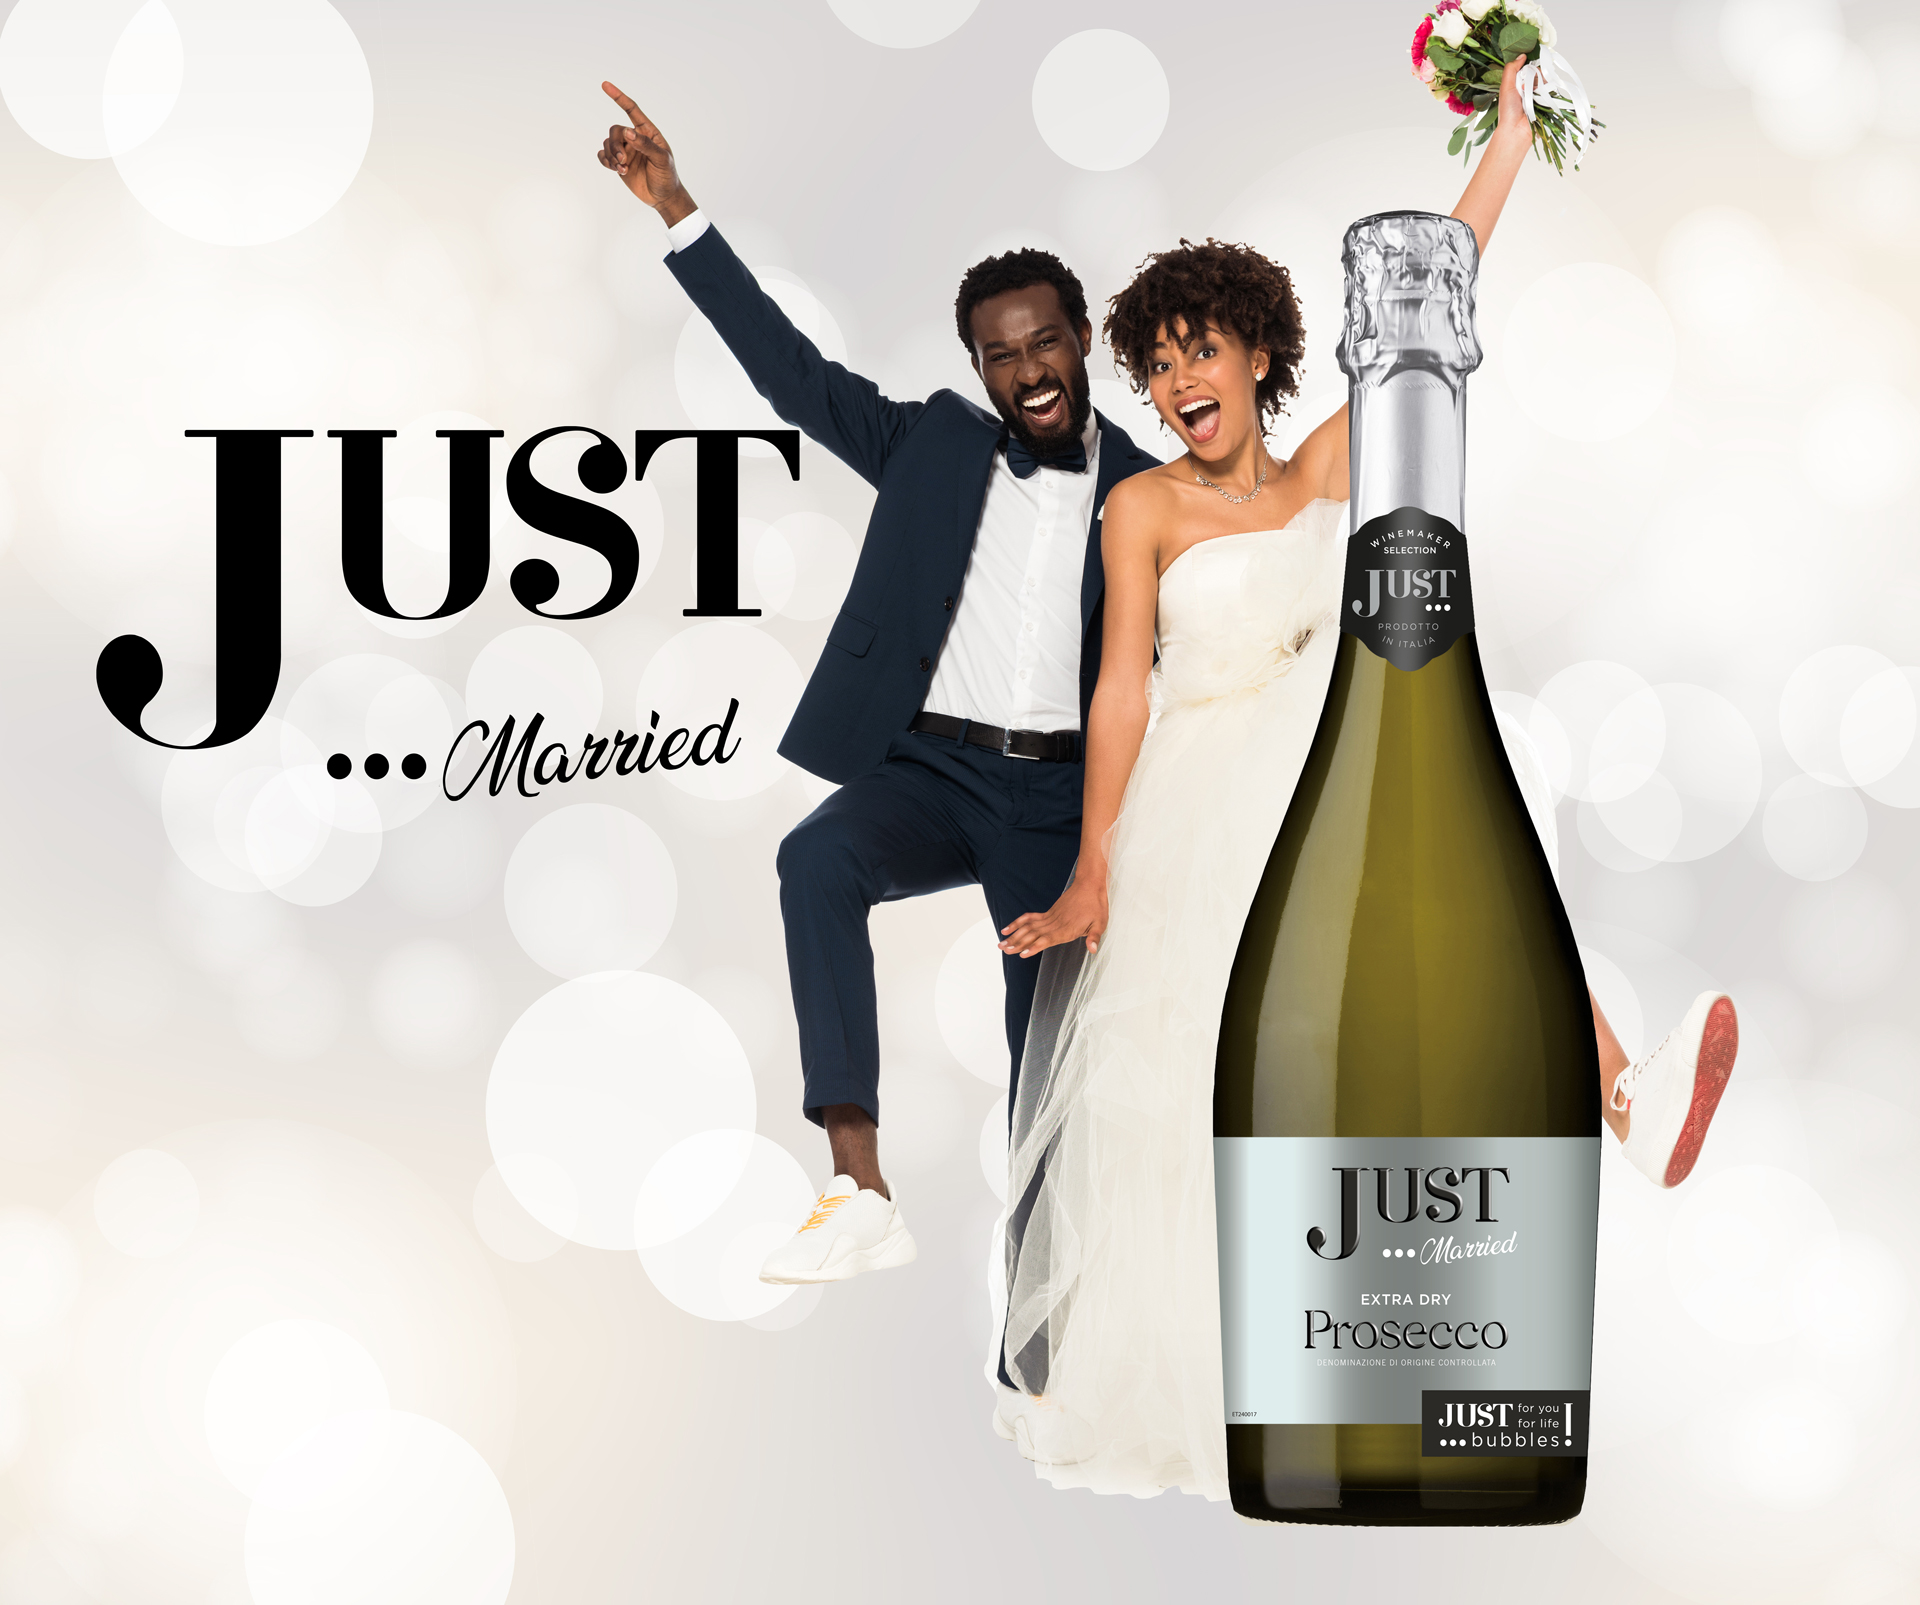 JUST "Married" Prosecco